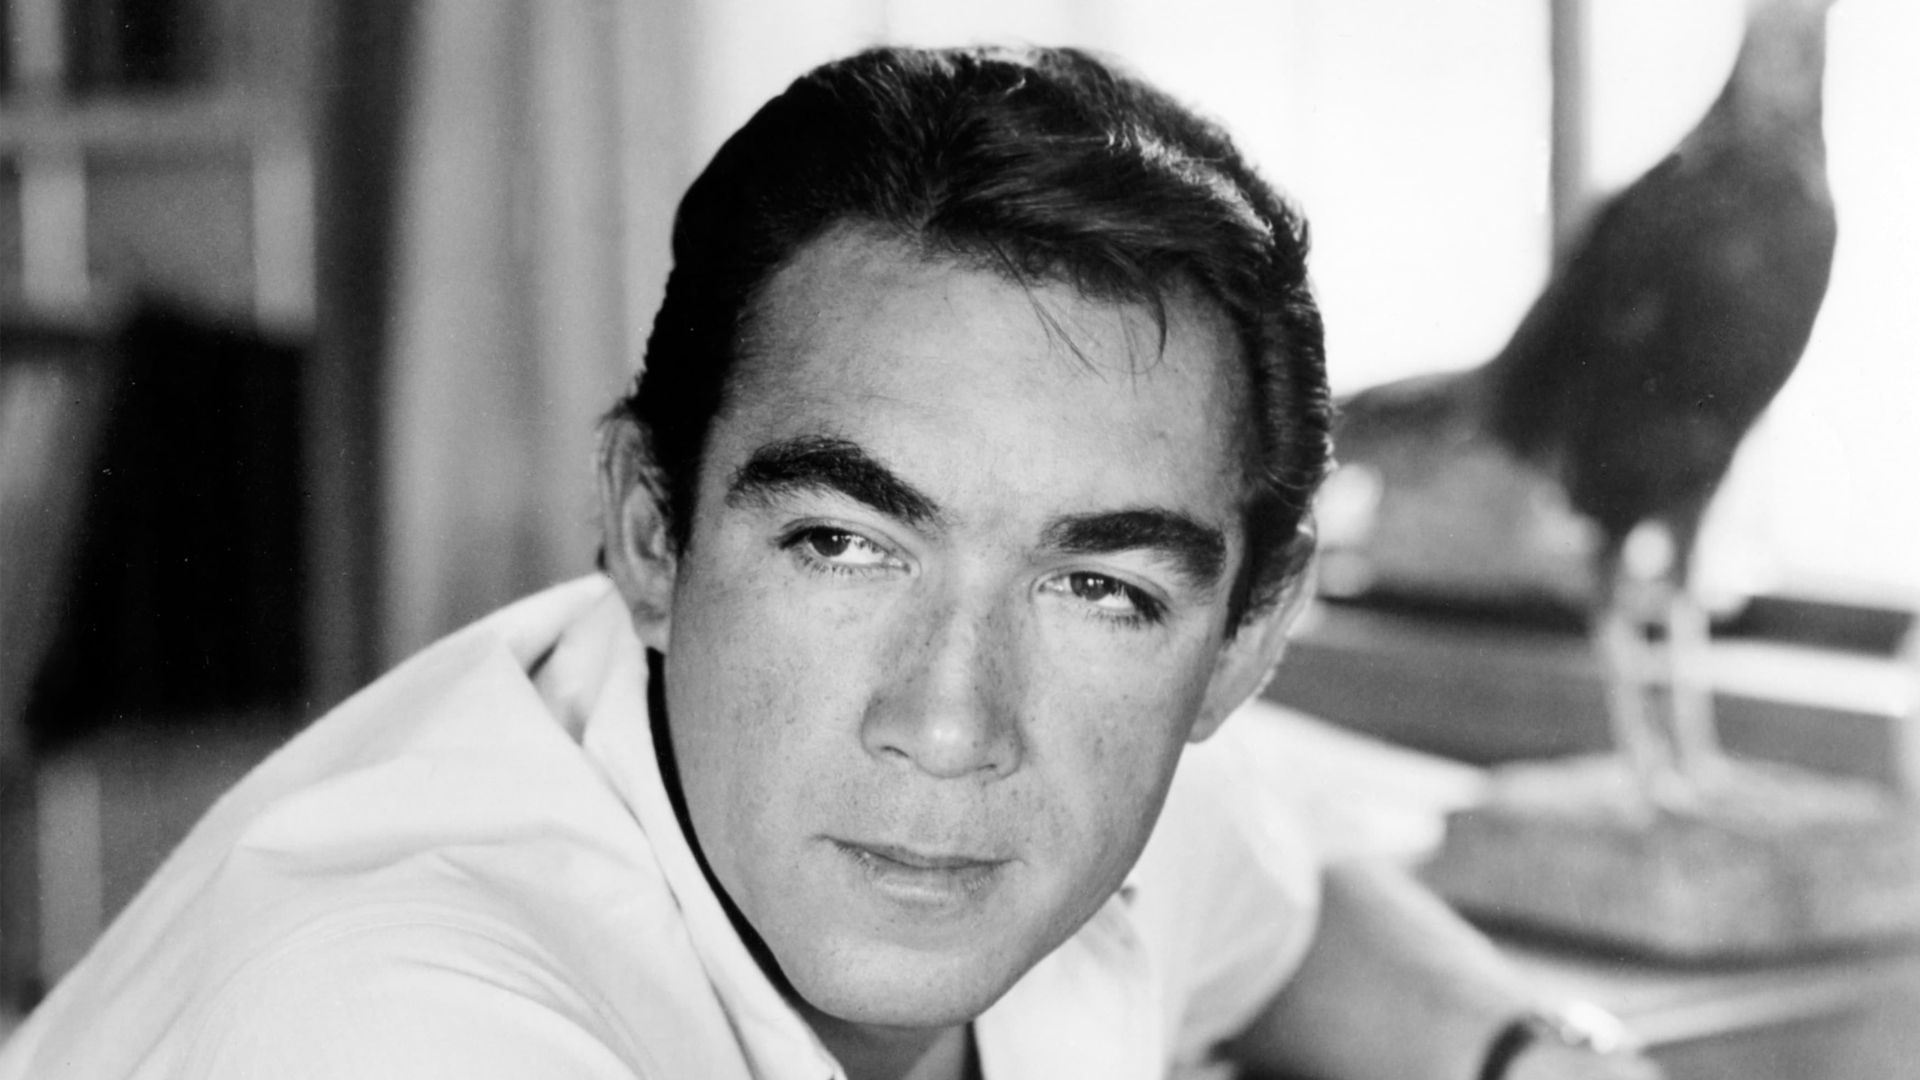 Anthony Quinn - Oscar-winning Mexican American Actor Known For His Roles In 'Viva Zapata!